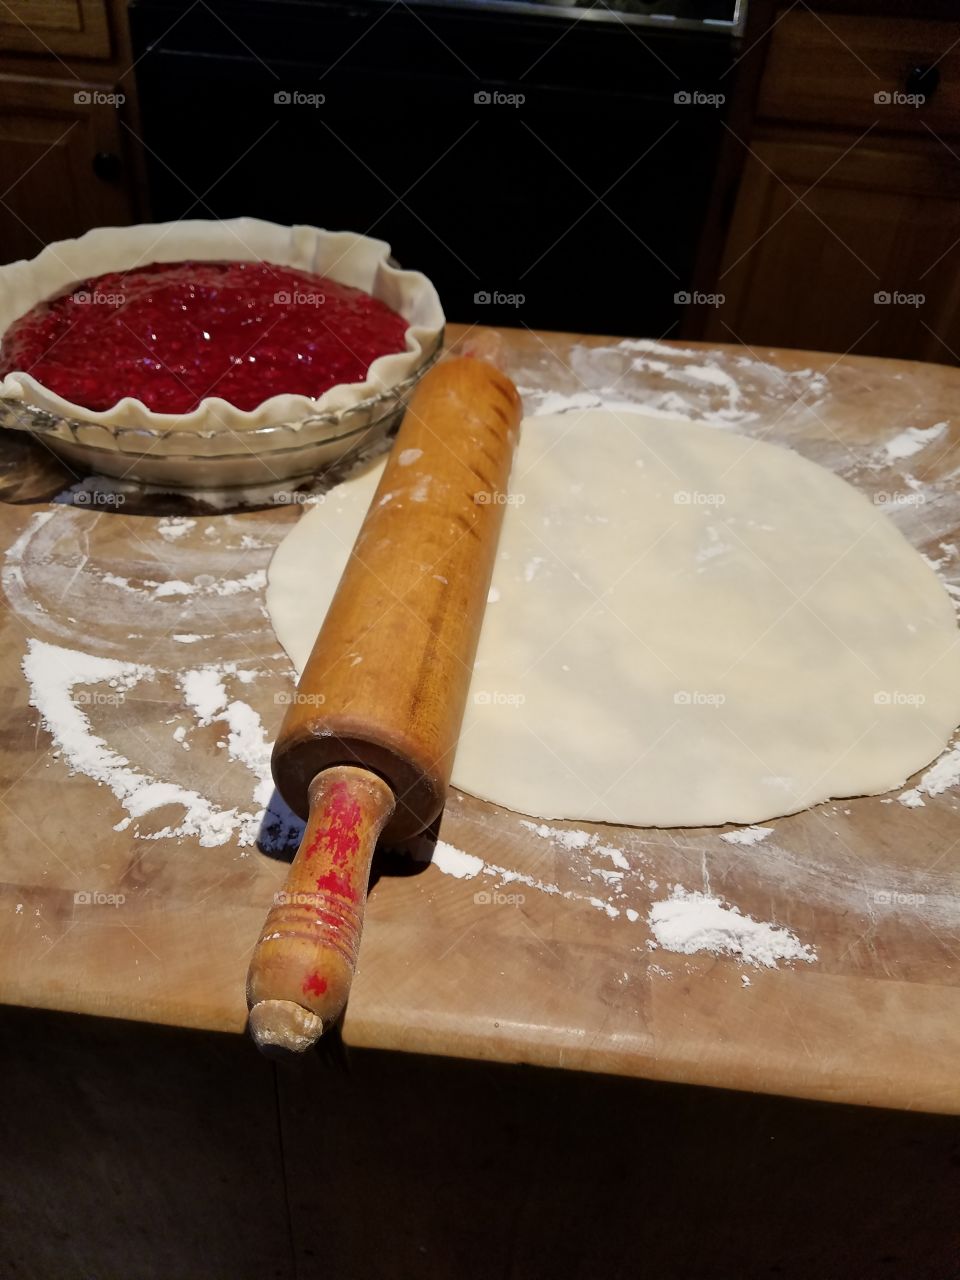 Raspberry Pie almost ready for baking.